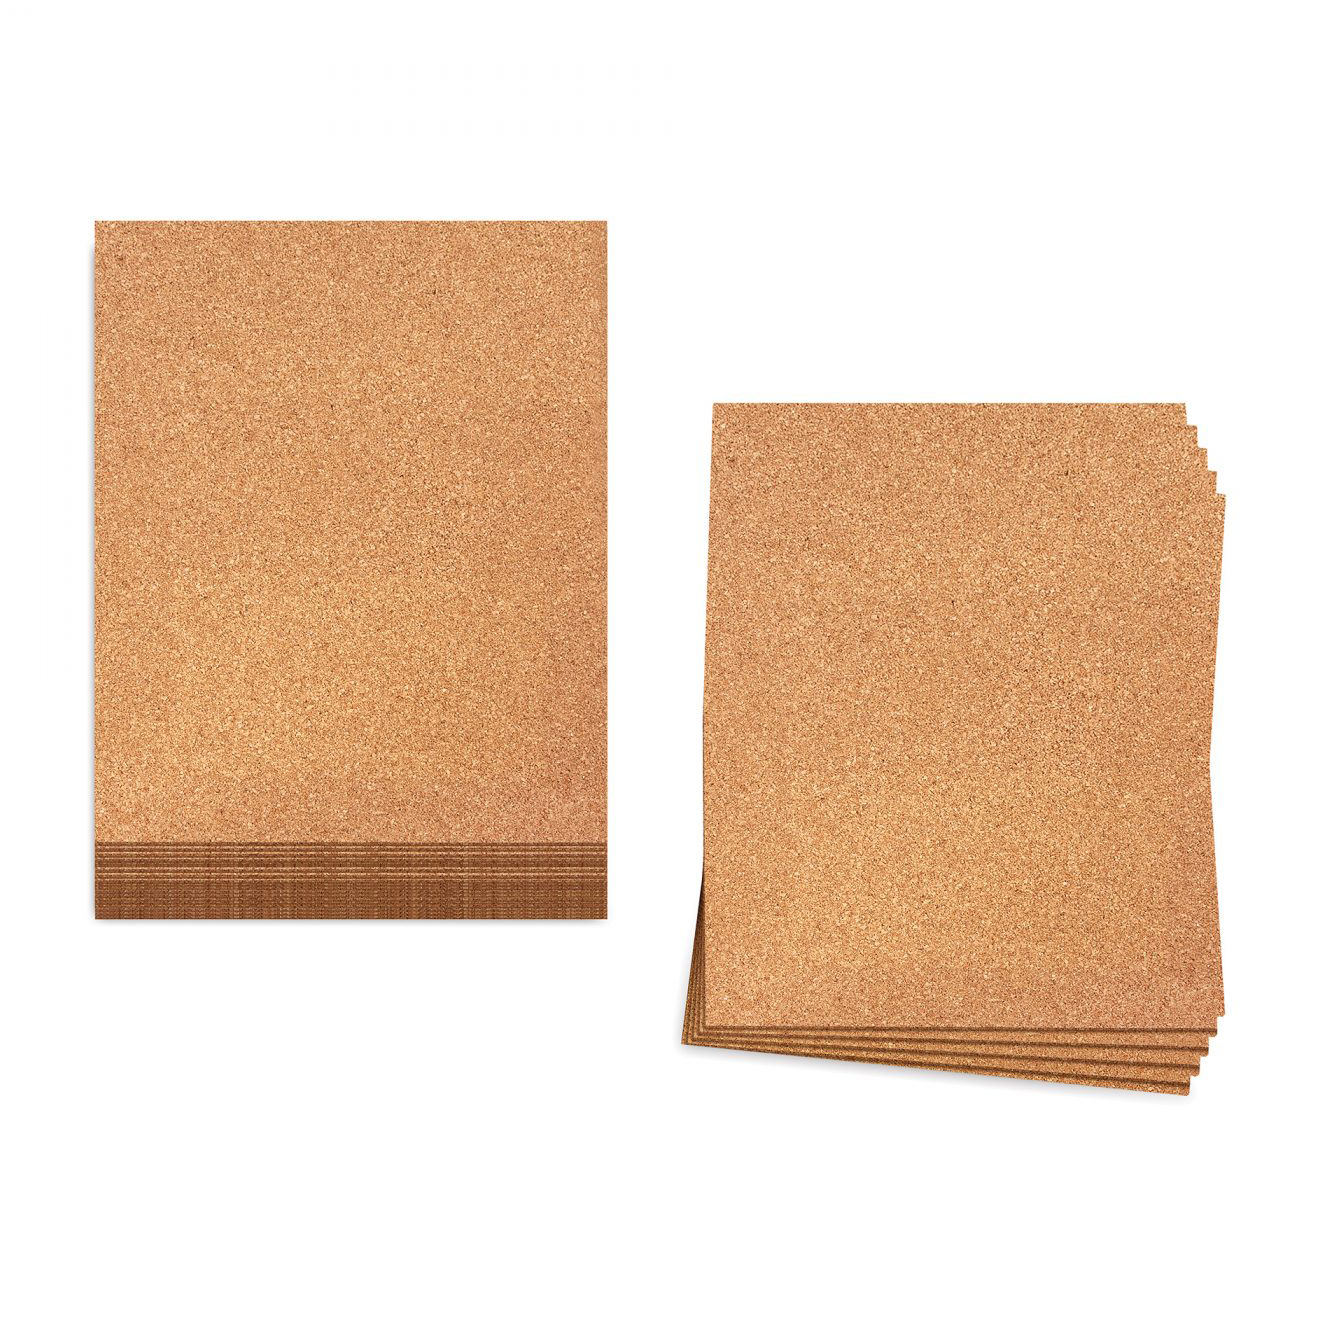 https://www.robertsconsolidated.com/wp-content/uploads/2022/12/ROBERTS_Natural-Cork-Underlayment-Sheets_50pk_70-175_Product-Image.jpg